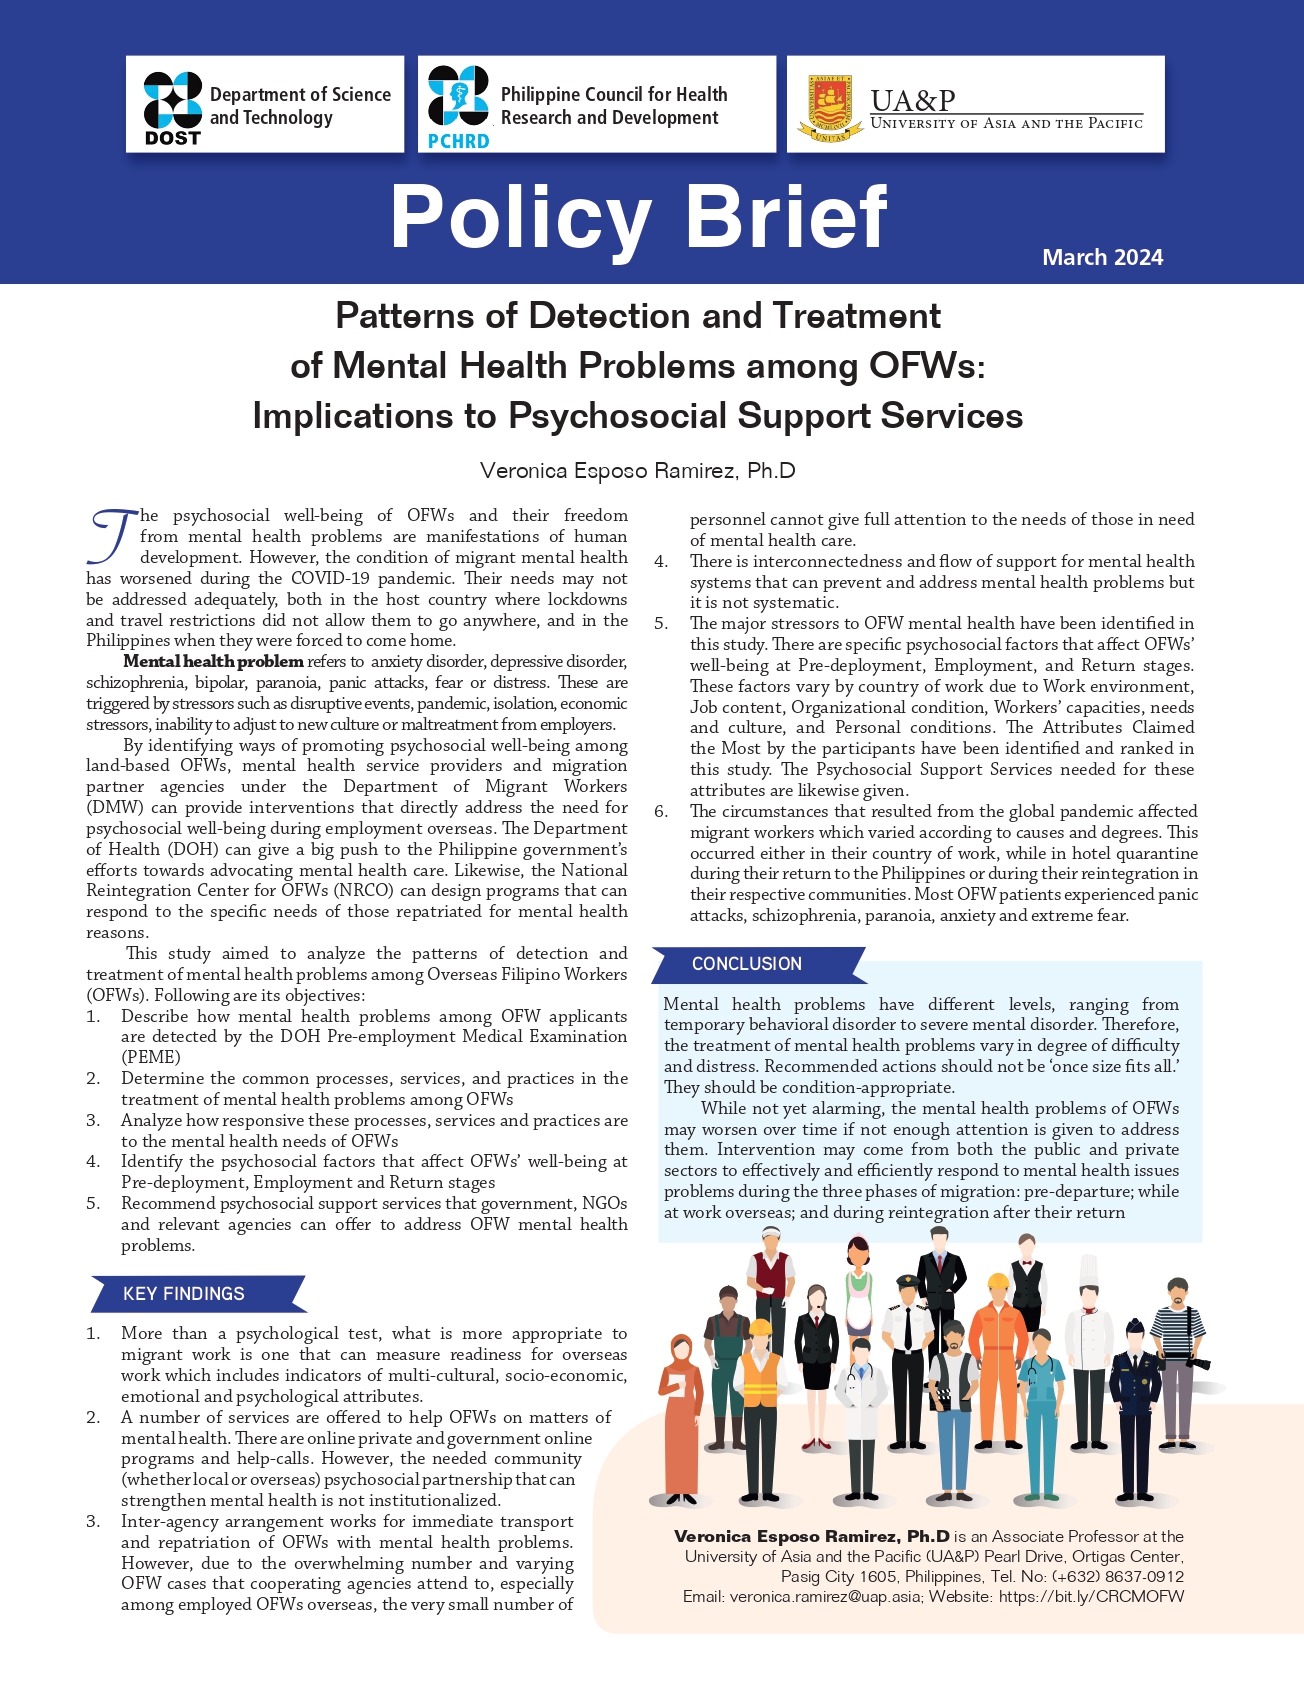 Patterns of Detection and Treatment of Mental Health Problems among OFWs: Implications to Psychosocial Support Services